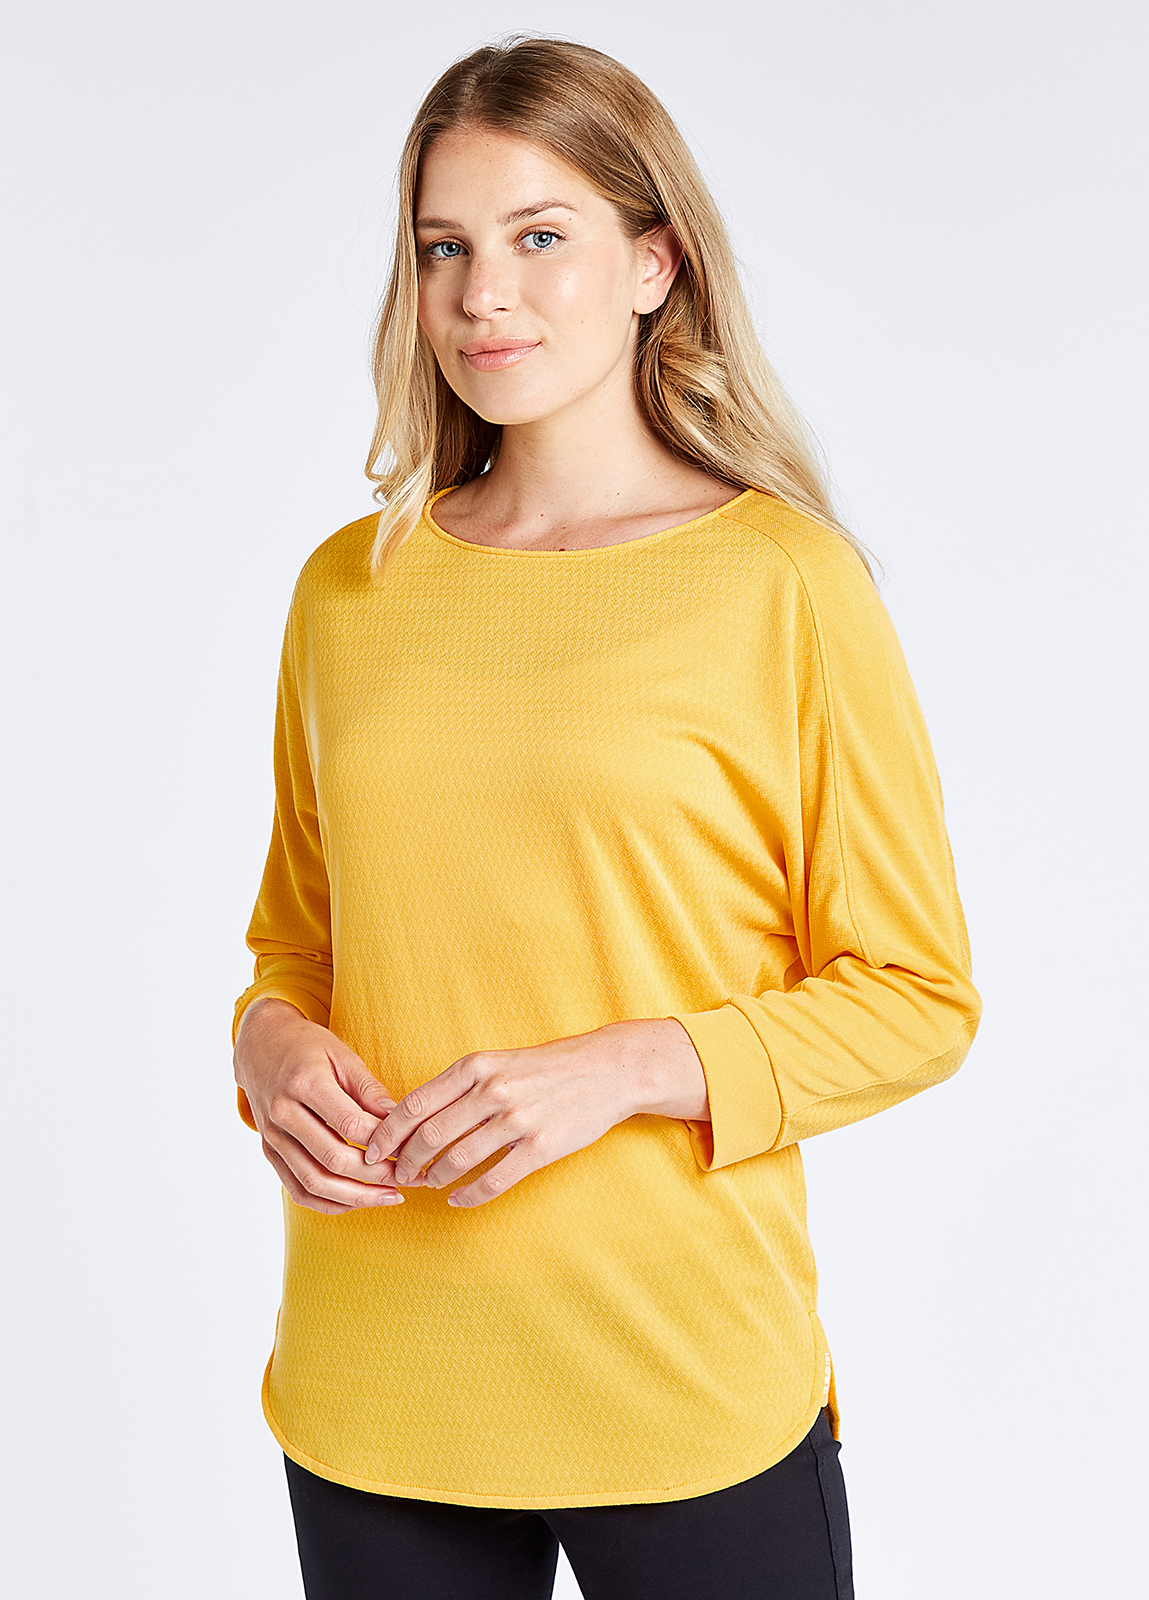 Templehouse Tunic Top - Goldfinch